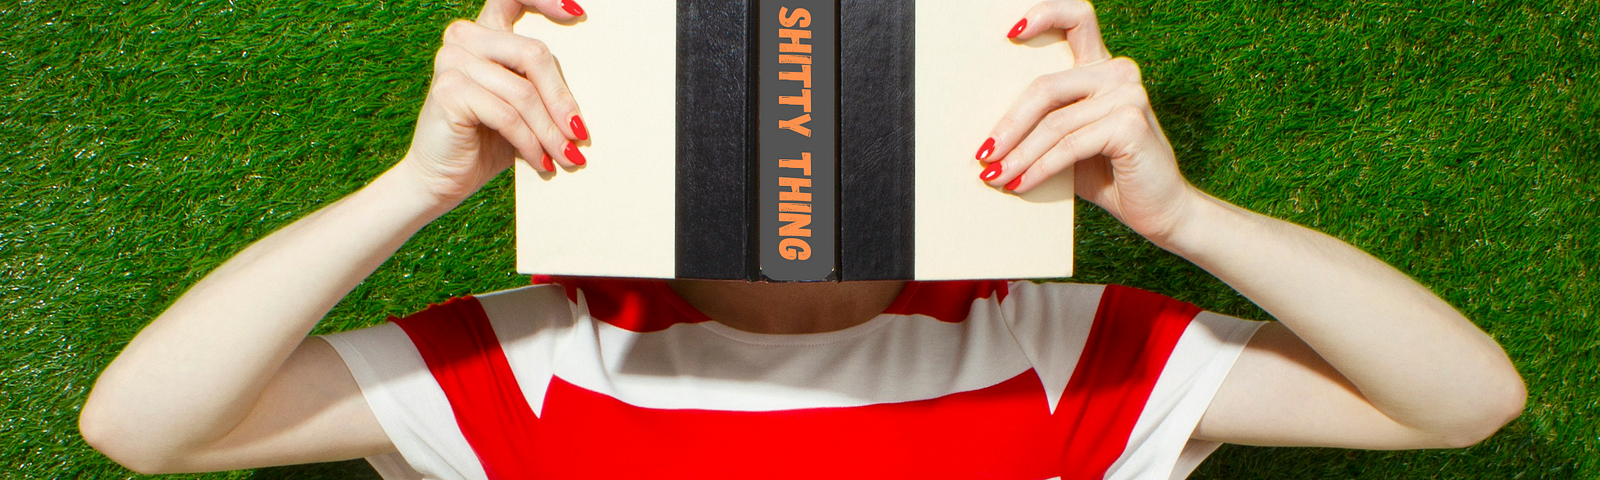 Woman holding an open book in front of her face, hiding behind it. The spine of the book reads Every Shitty Thing. She wears a stark red and white horizontal striped t-shirt and a green grass wall is the backdrop.